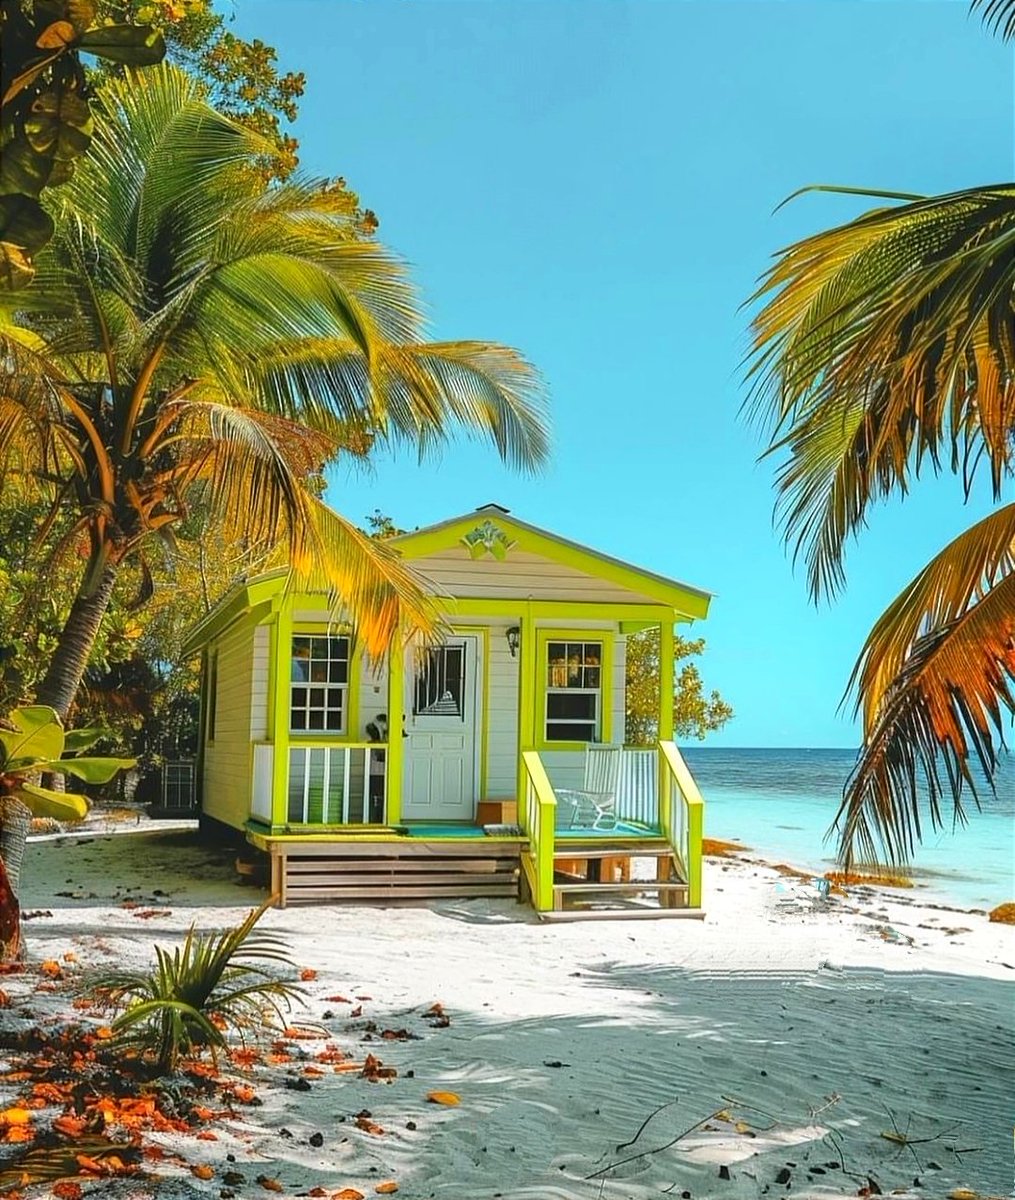 Waking up to the sound of the waves crashing is pure bliss. This tiny house on the beach is my own little piece of paradise. 🌊🏝️
 #vacationhome #happyplacefound #tinyhome #tinyliving #tinyhomeliving #tinyhouseliving #beachhome #HomeSweetHome